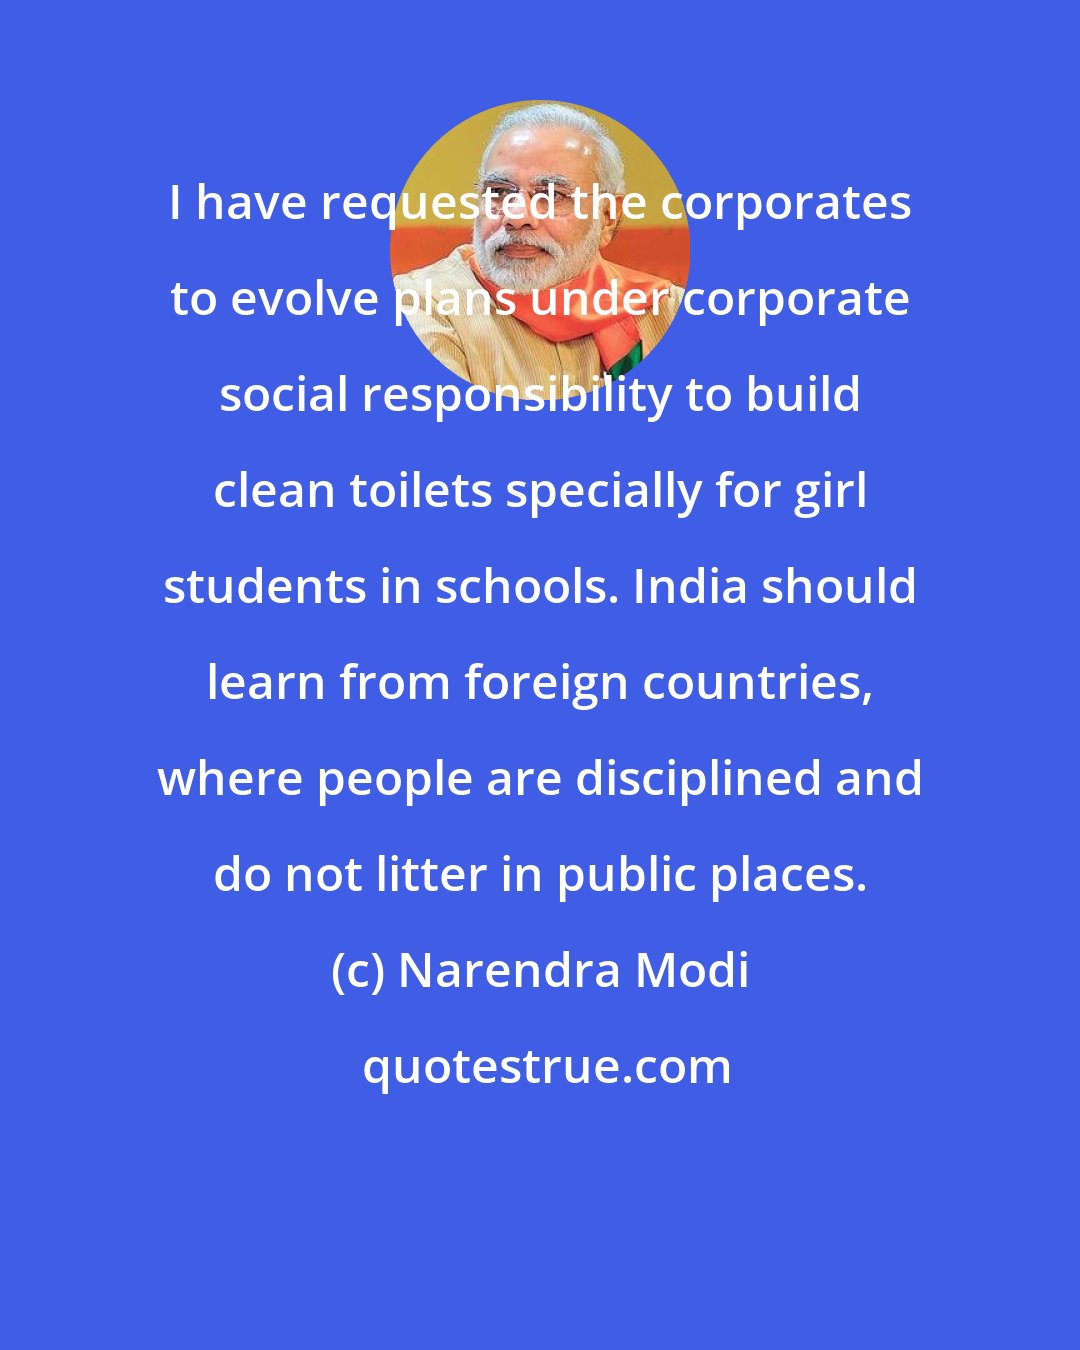 Narendra Modi: I have requested the corporates to evolve plans under corporate social responsibility to build clean toilets specially for girl students in schools. India should learn from foreign countries, where people are disciplined and do not litter in public places.